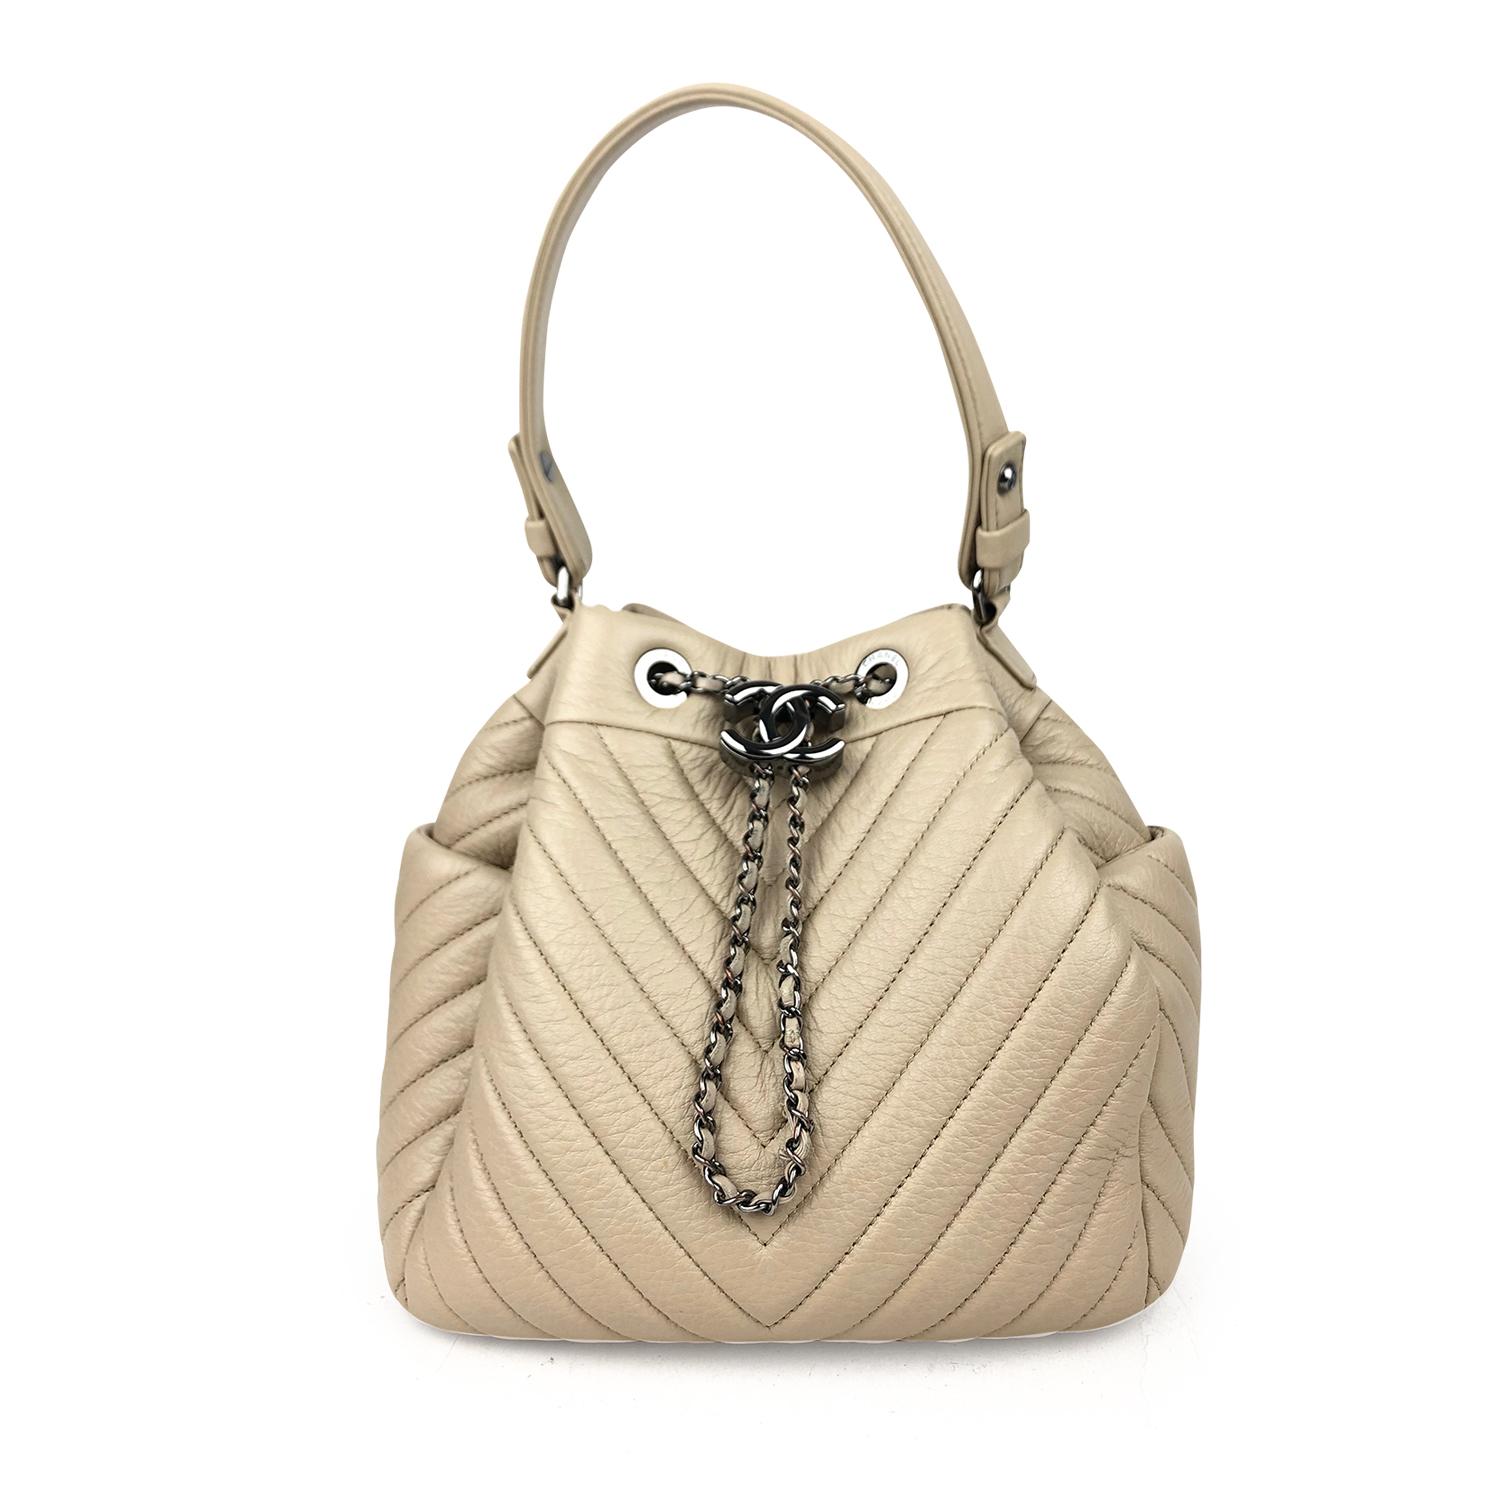 Tan chevron quilted sheepskin Chanel Small Boyish Bucket bag with 

– From the Fall 2016 Collection
– Ruthenium hardware
– Single flat top handle
– Single optional chain-link shoulder strap with leather shoulder guard
– Dual exterior slit pockets,